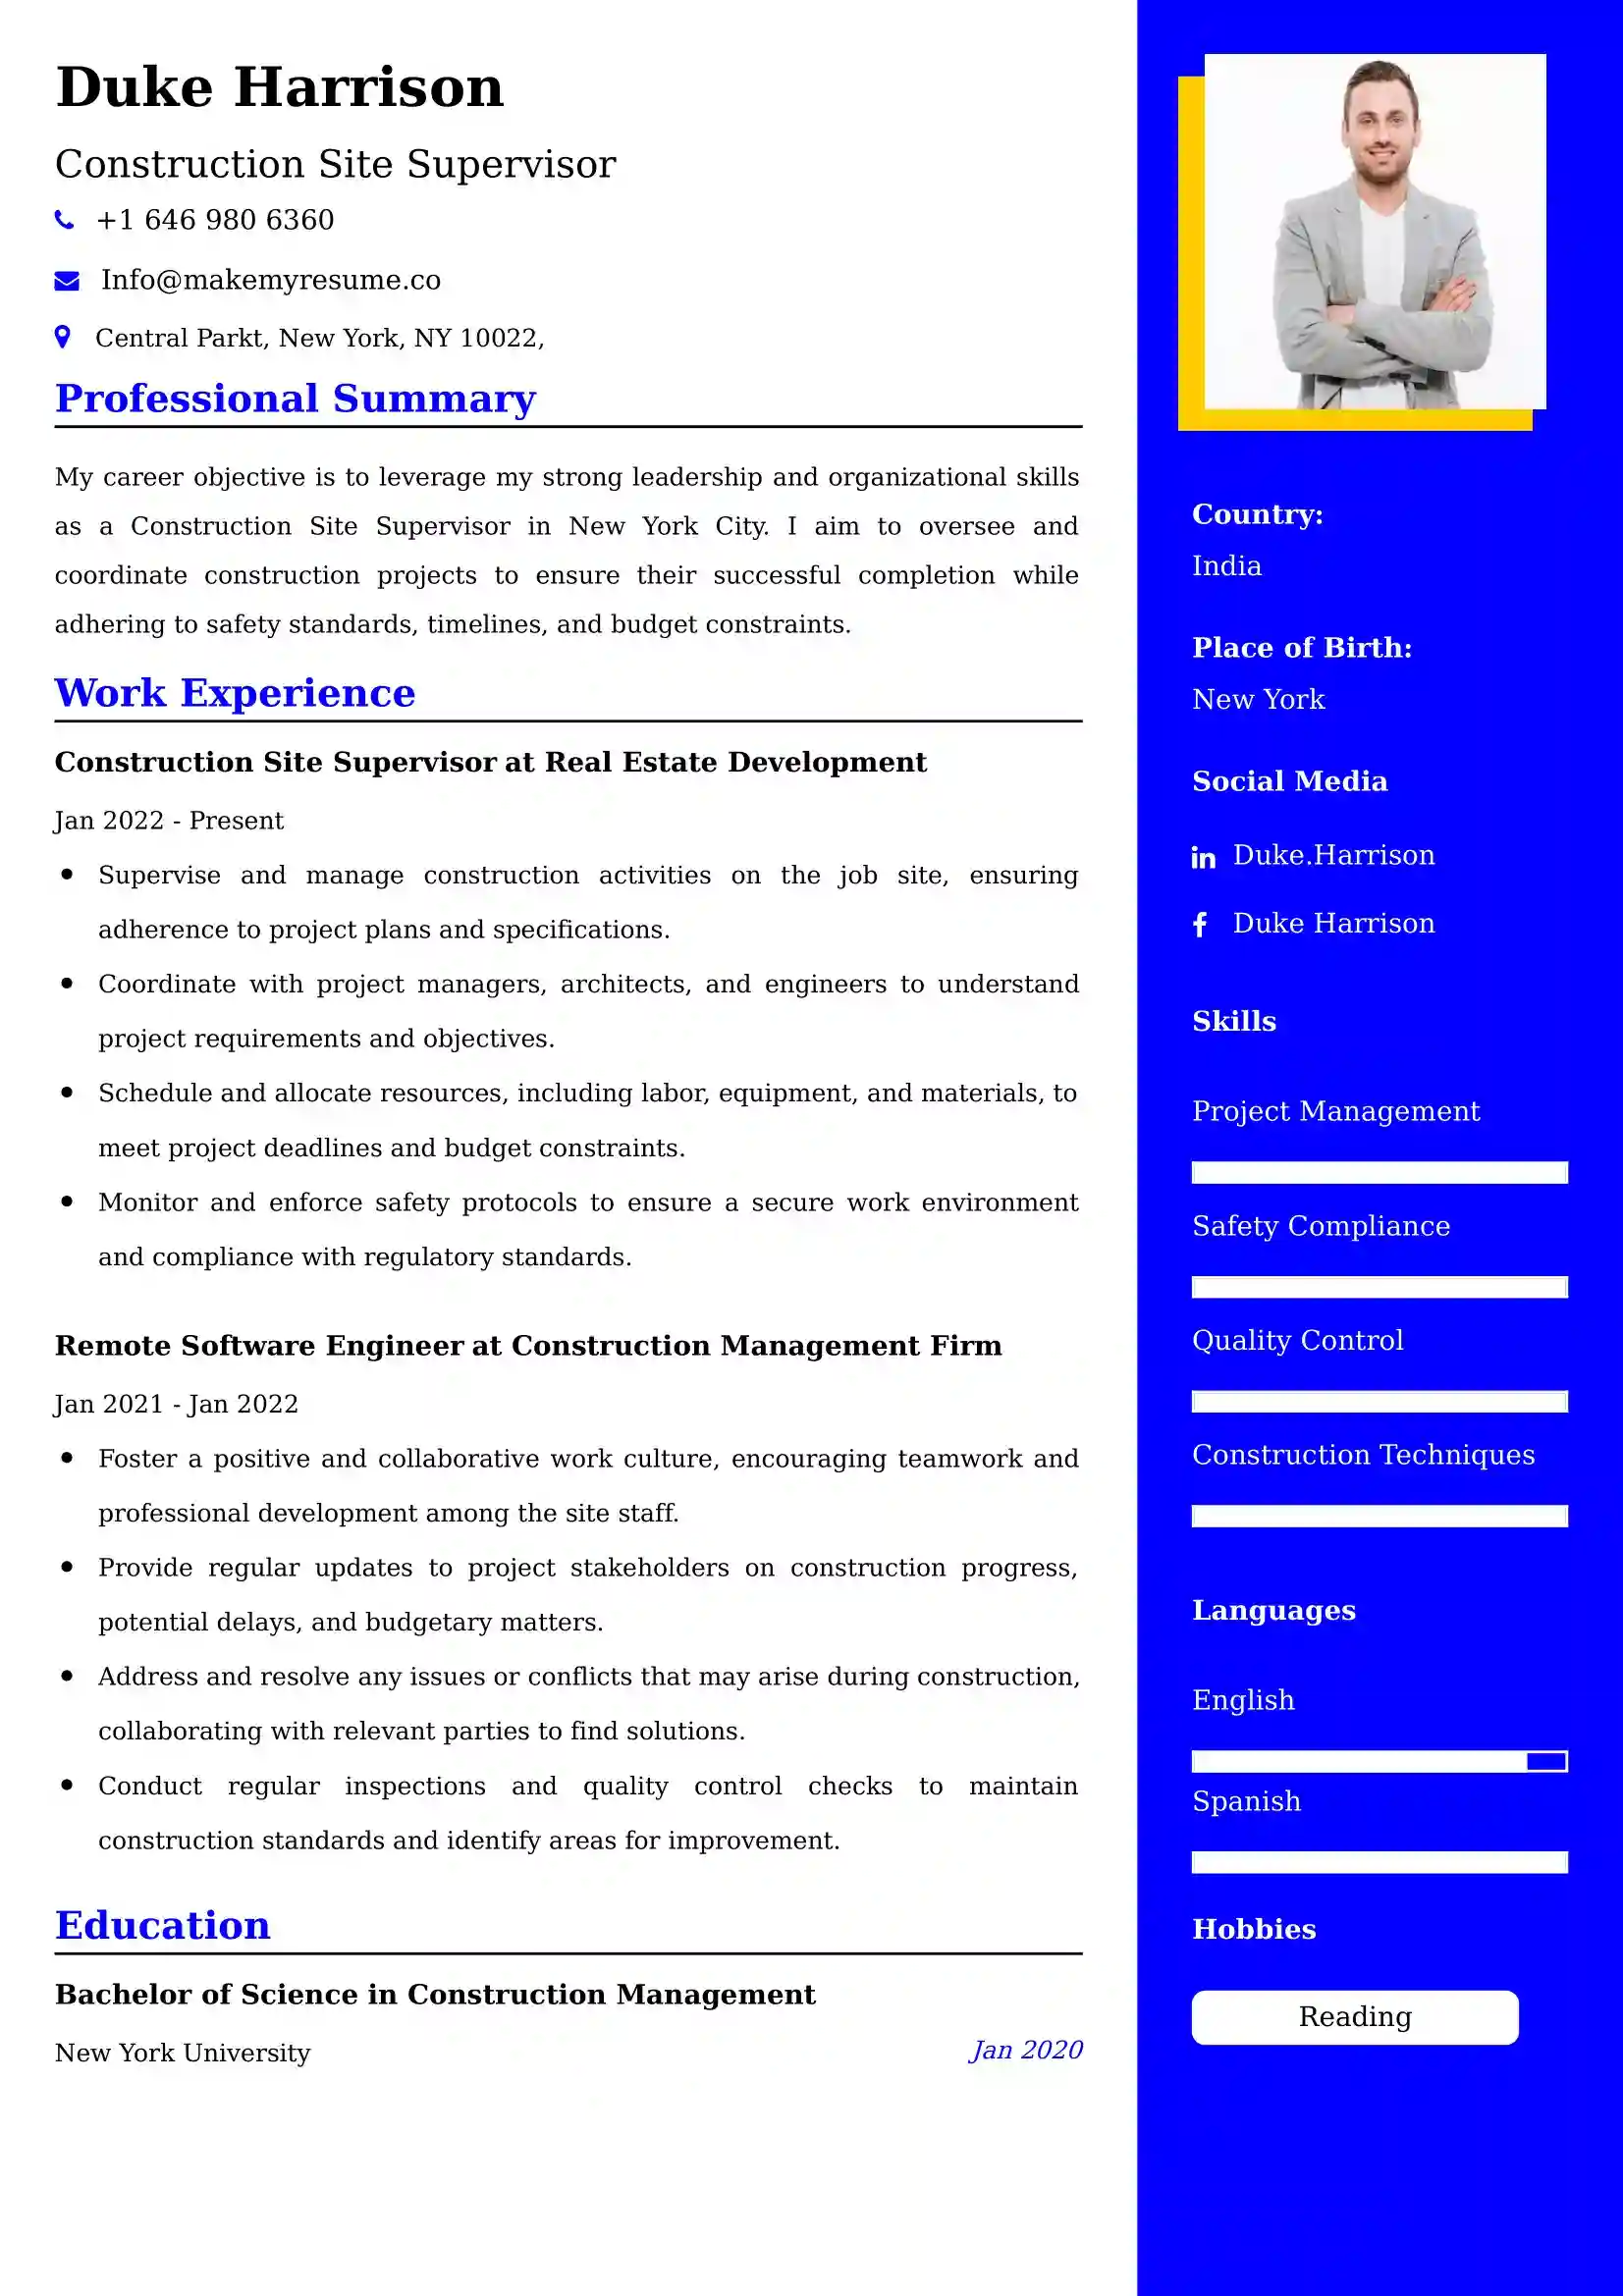 Construction Site Supervisor Resume Examples - Brazilian Format, Latest Template